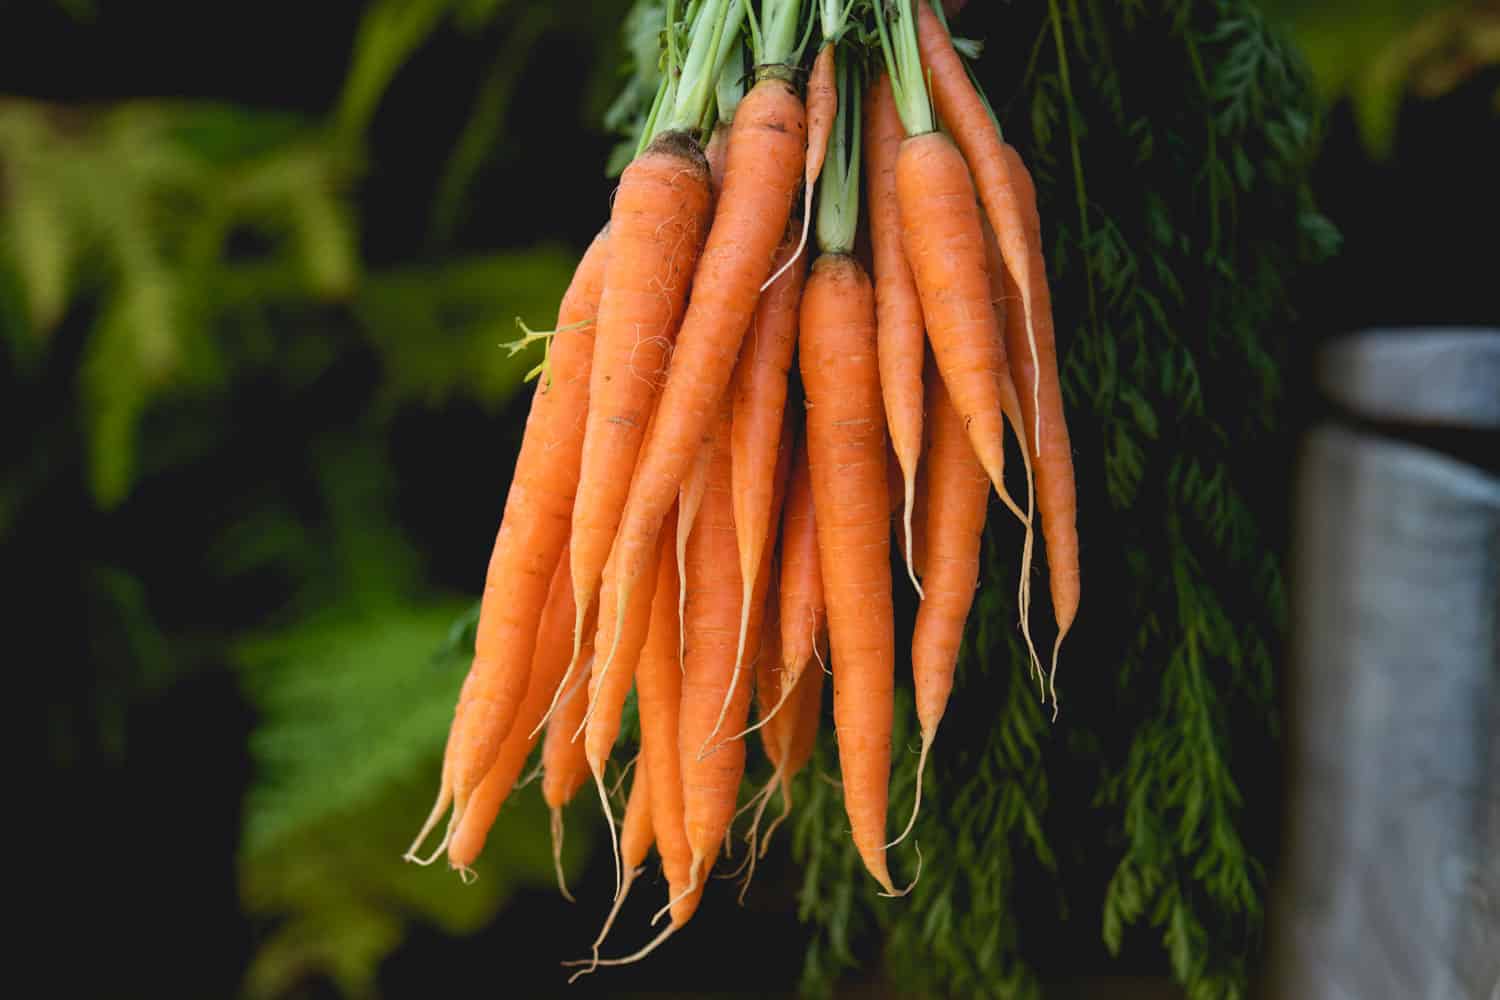 A pile of healthy baby carrots